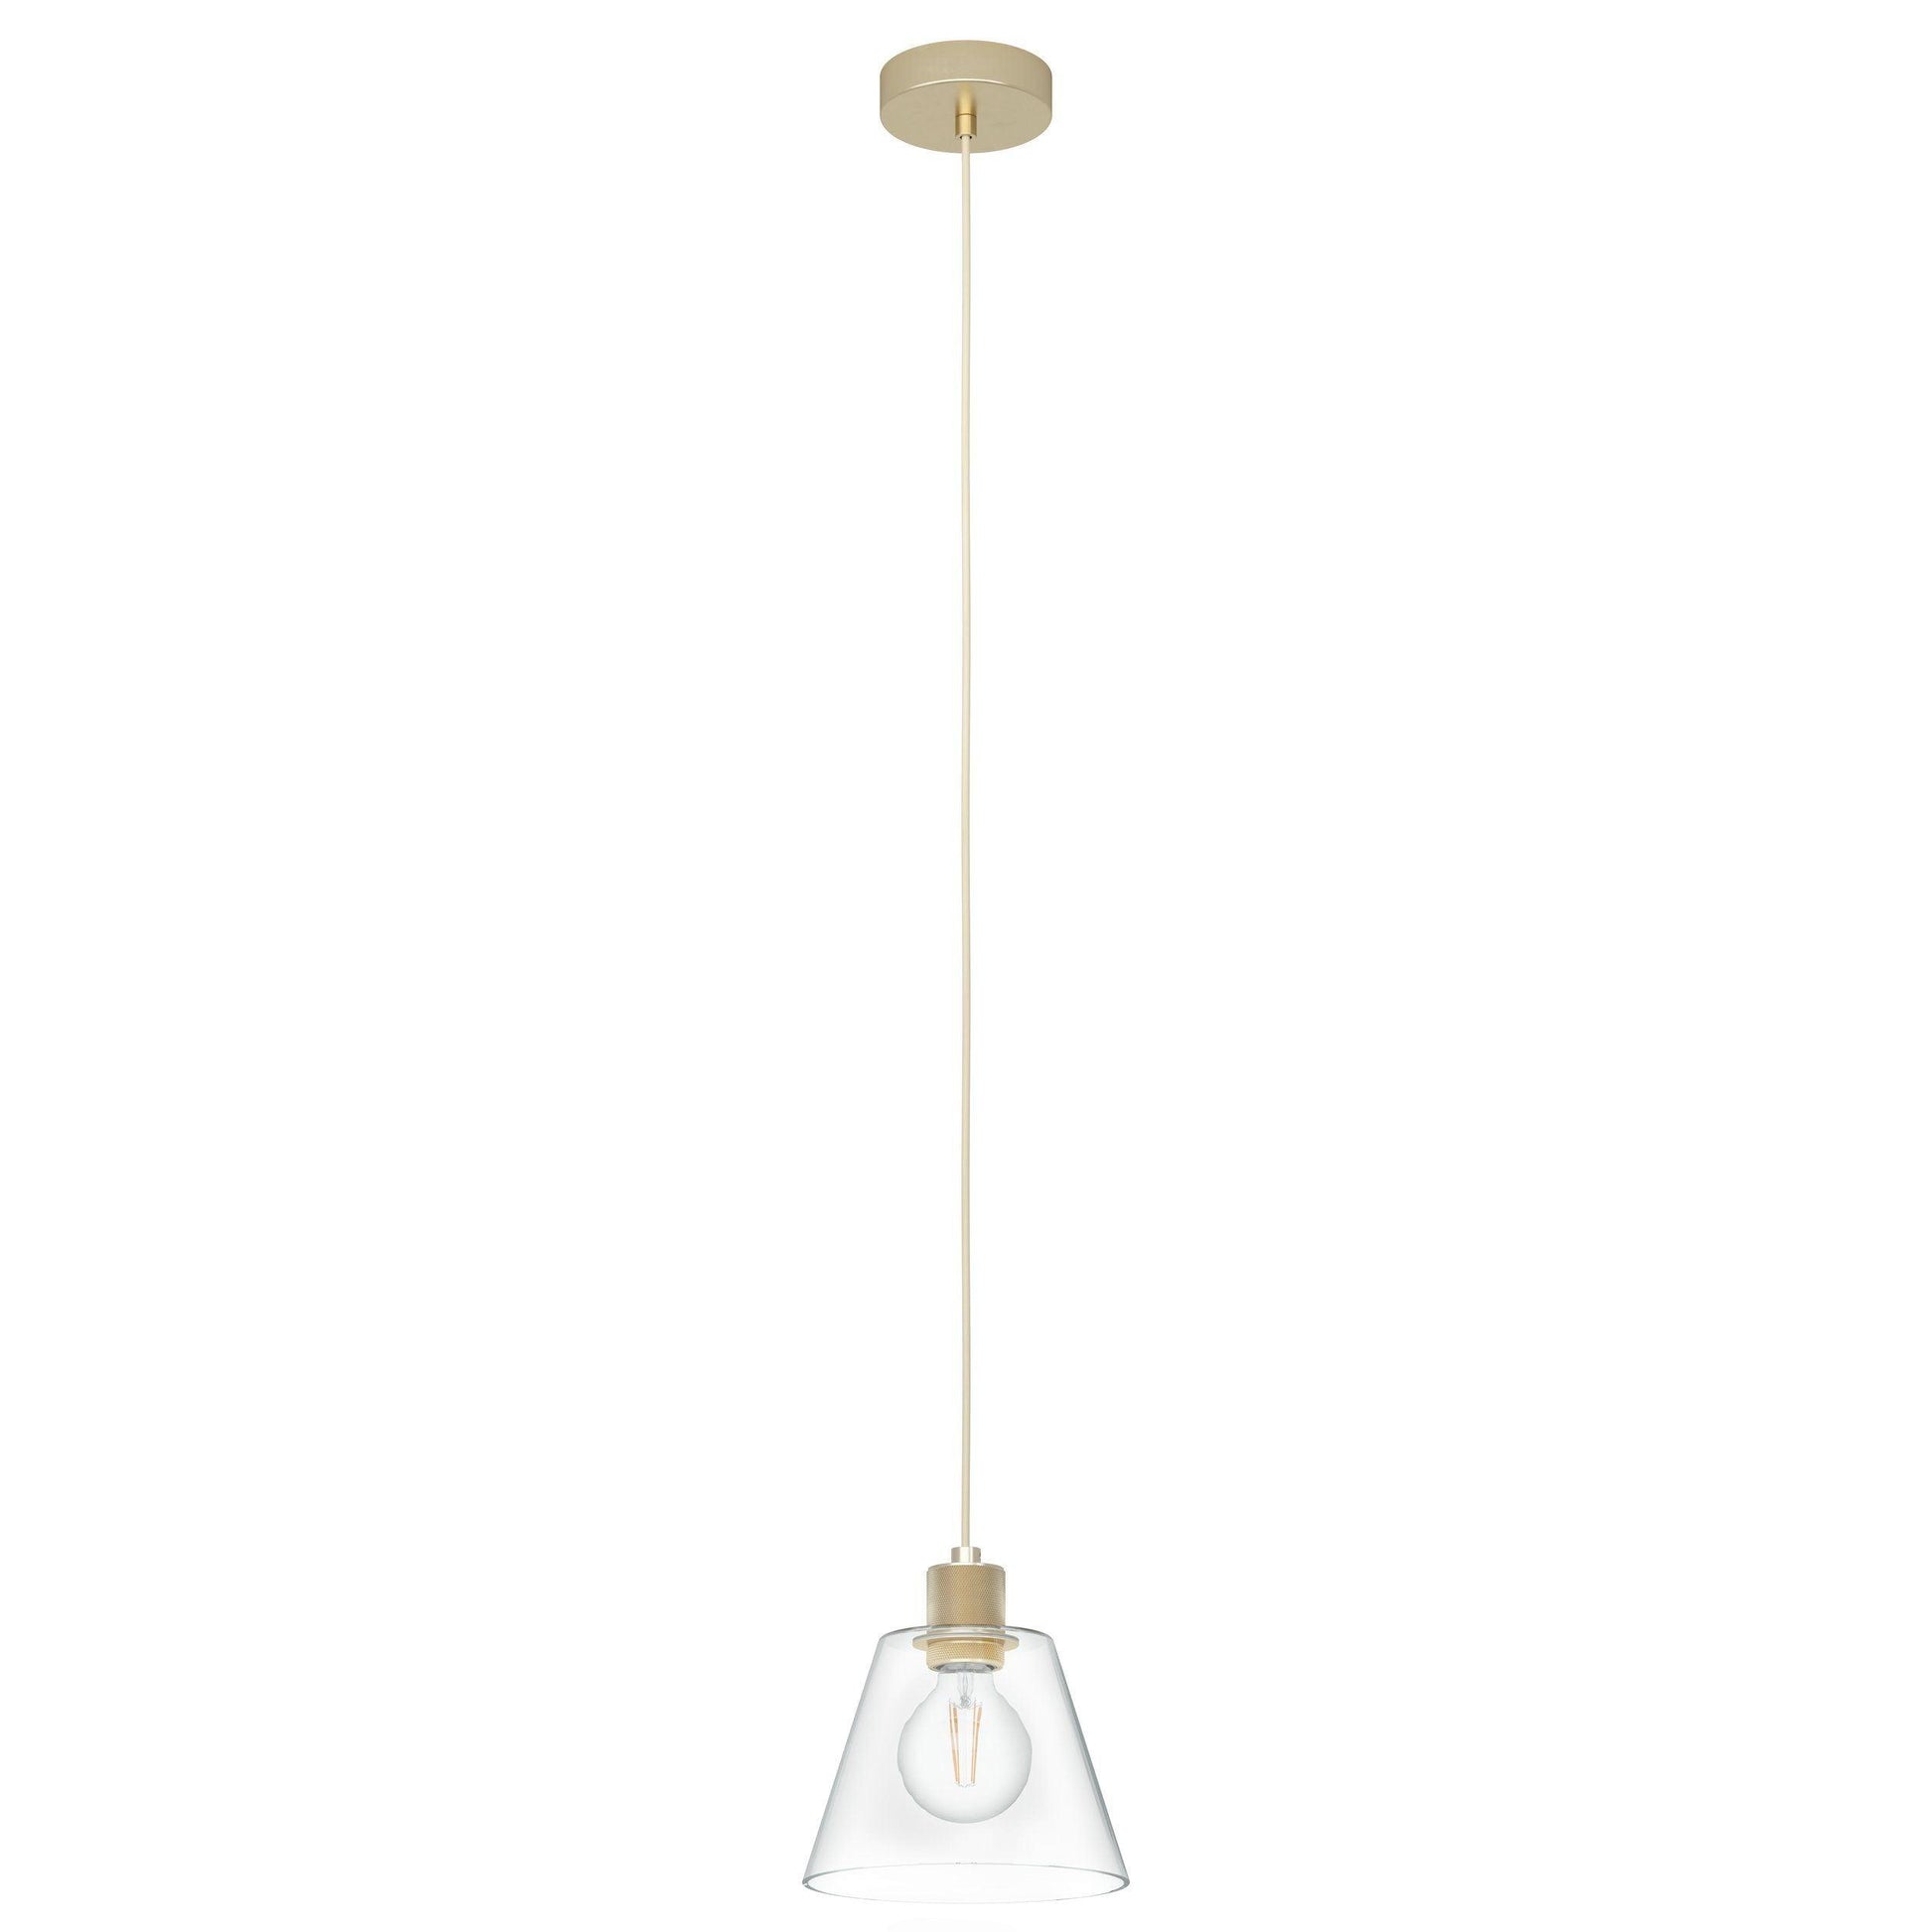 COPLEY pendant light by The Light Library